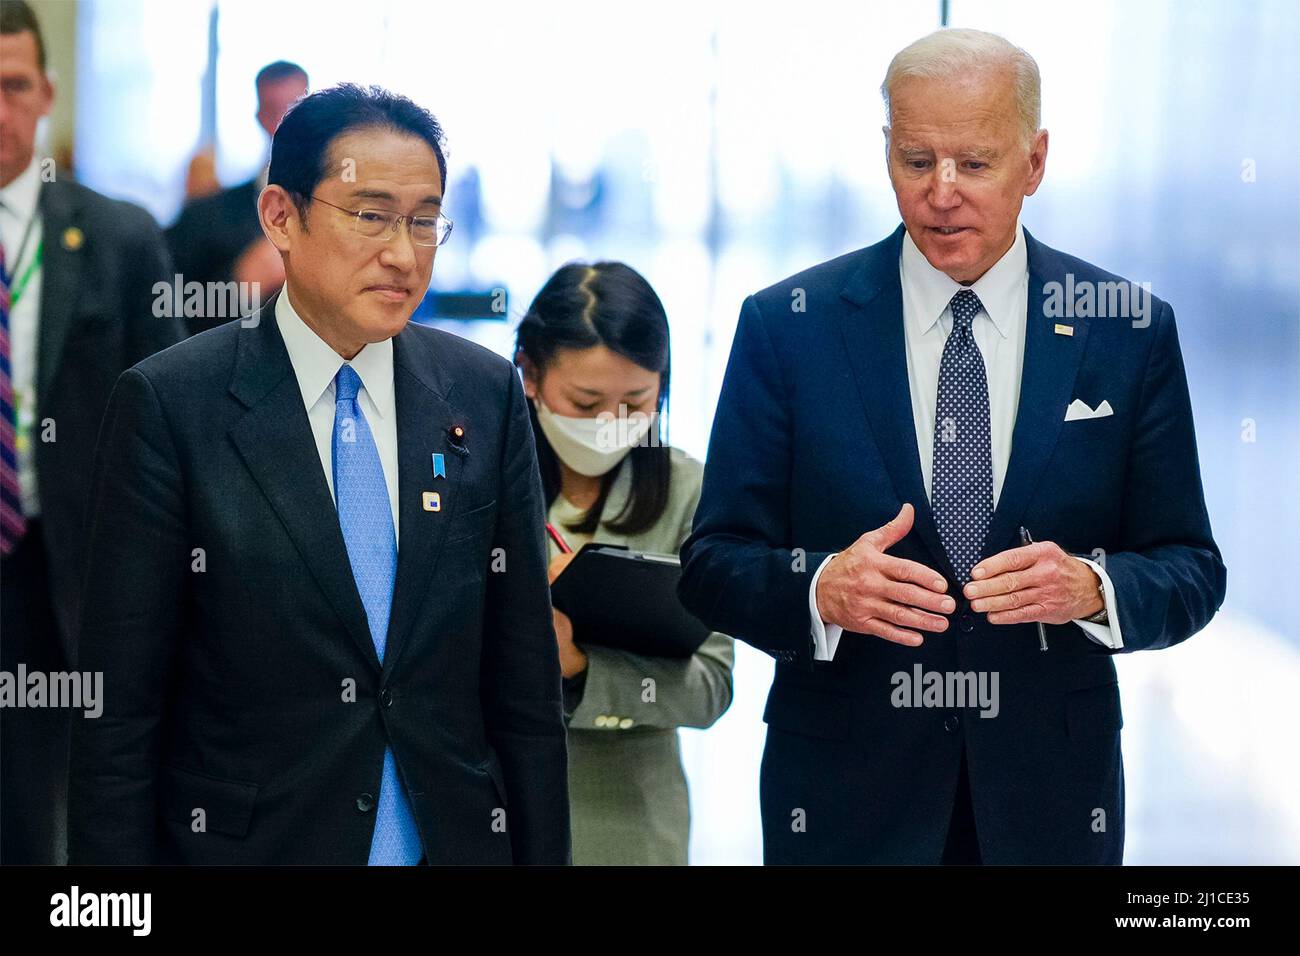 Brussels, Belgium. 24th Mar, 2022. U.S President Joe Biden, walks with Japanese Prime Minister Fumio Kishida, left, during the emergency meeting of the G7 nations at NATO headquarters, March 24, 2022 in Brussels, Belgium. Biden is hoping allied nations will continue to ramp up pressure on Russia as Ukraine marks a month since the invasion. Credit: Adam Schultz/White House Photo/Alamy Live News Stock Photo